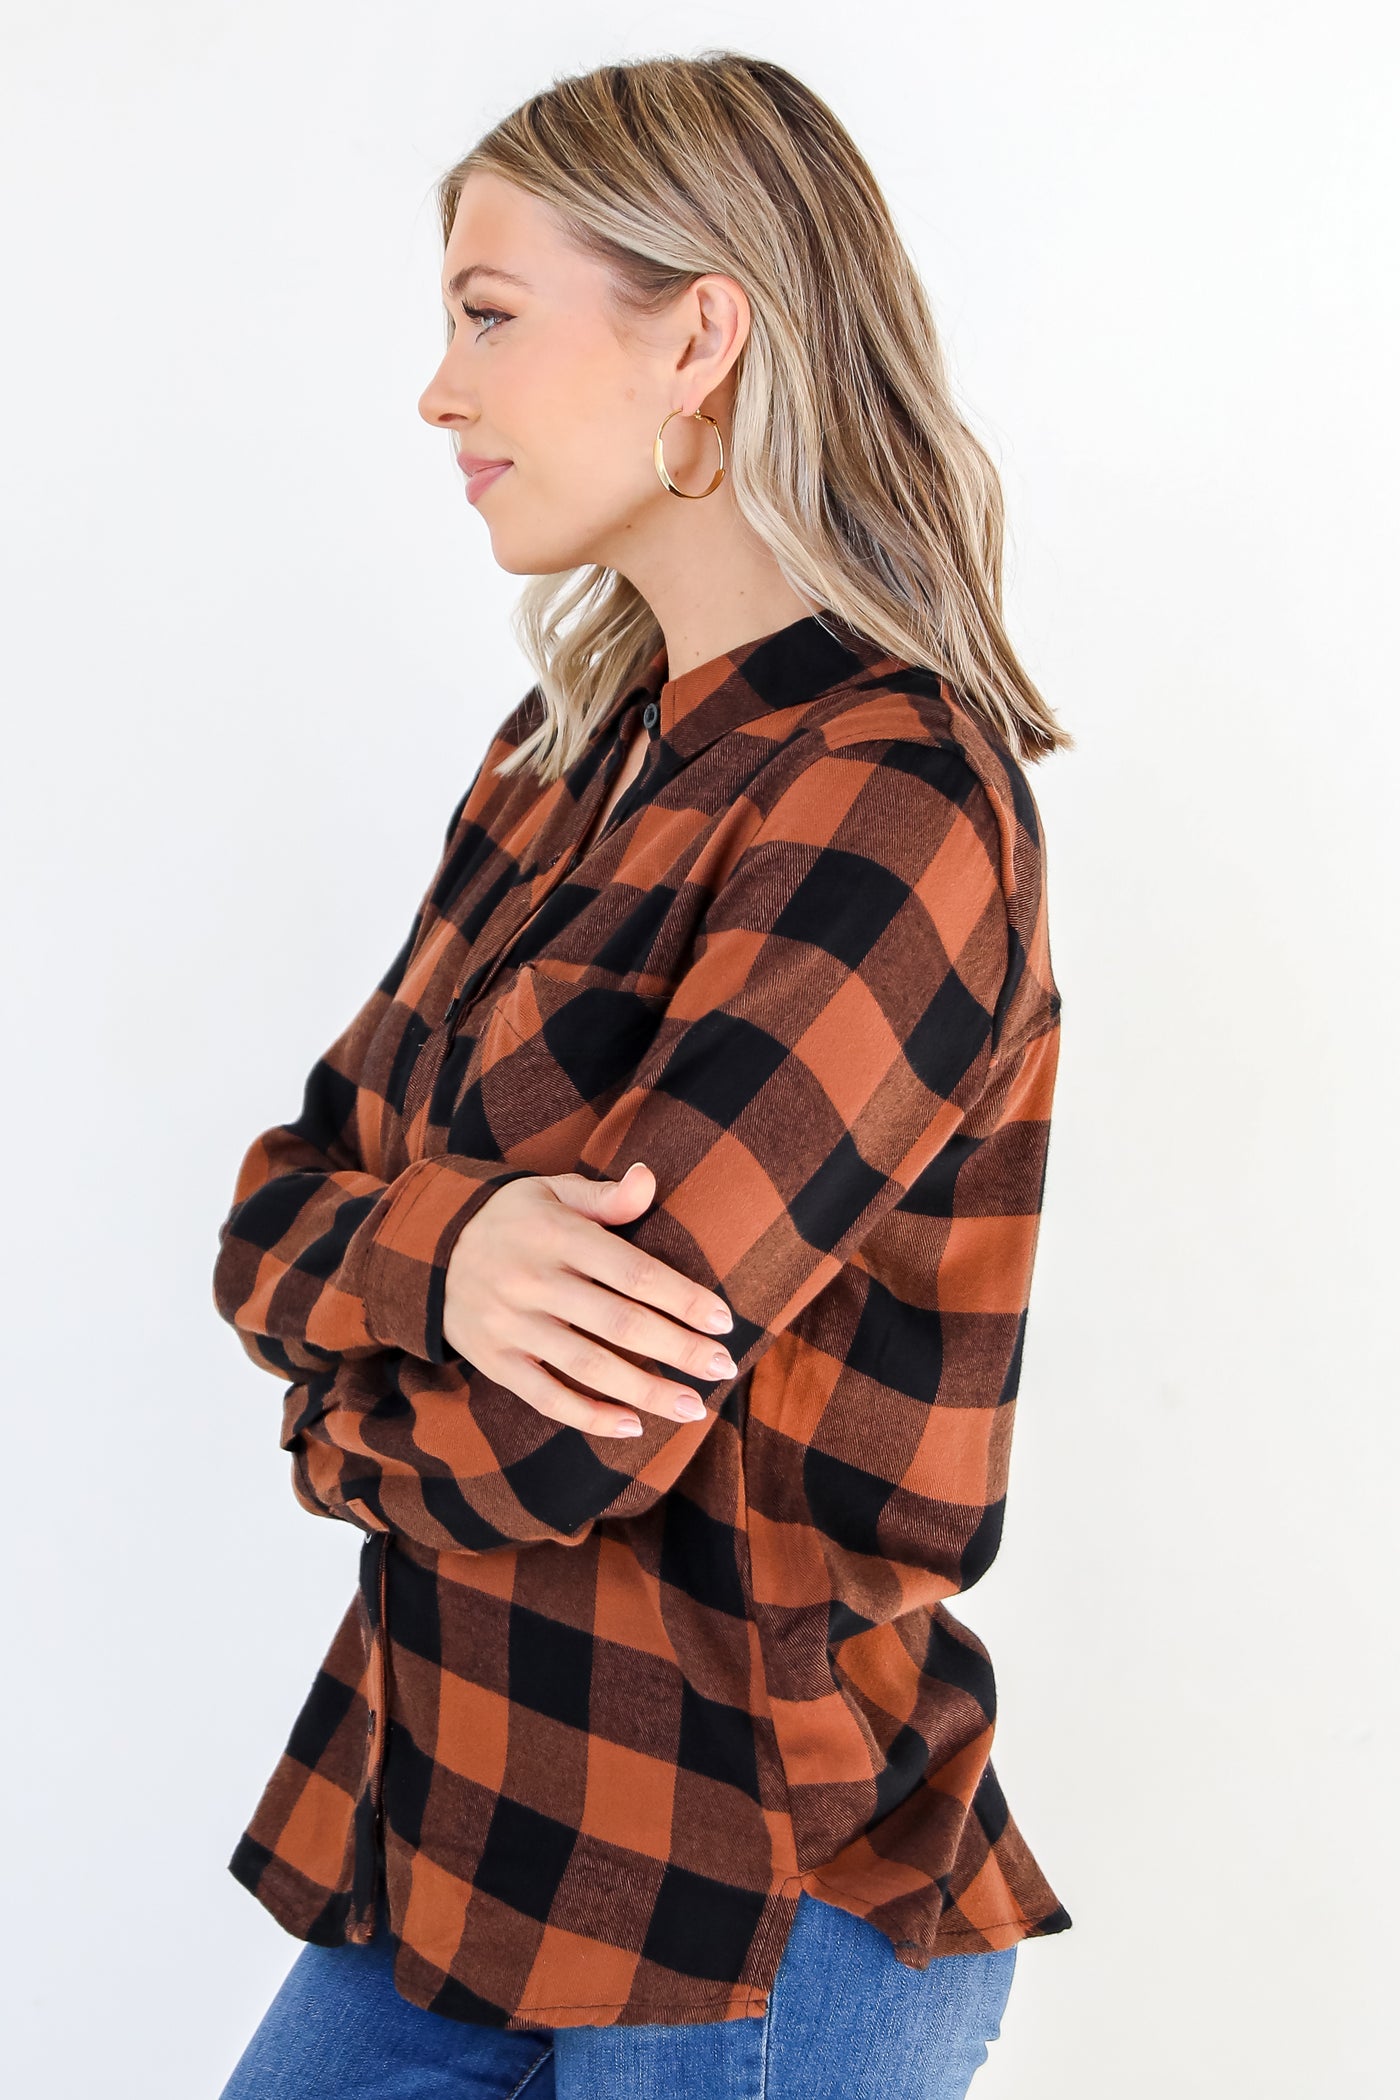 Flannel side view